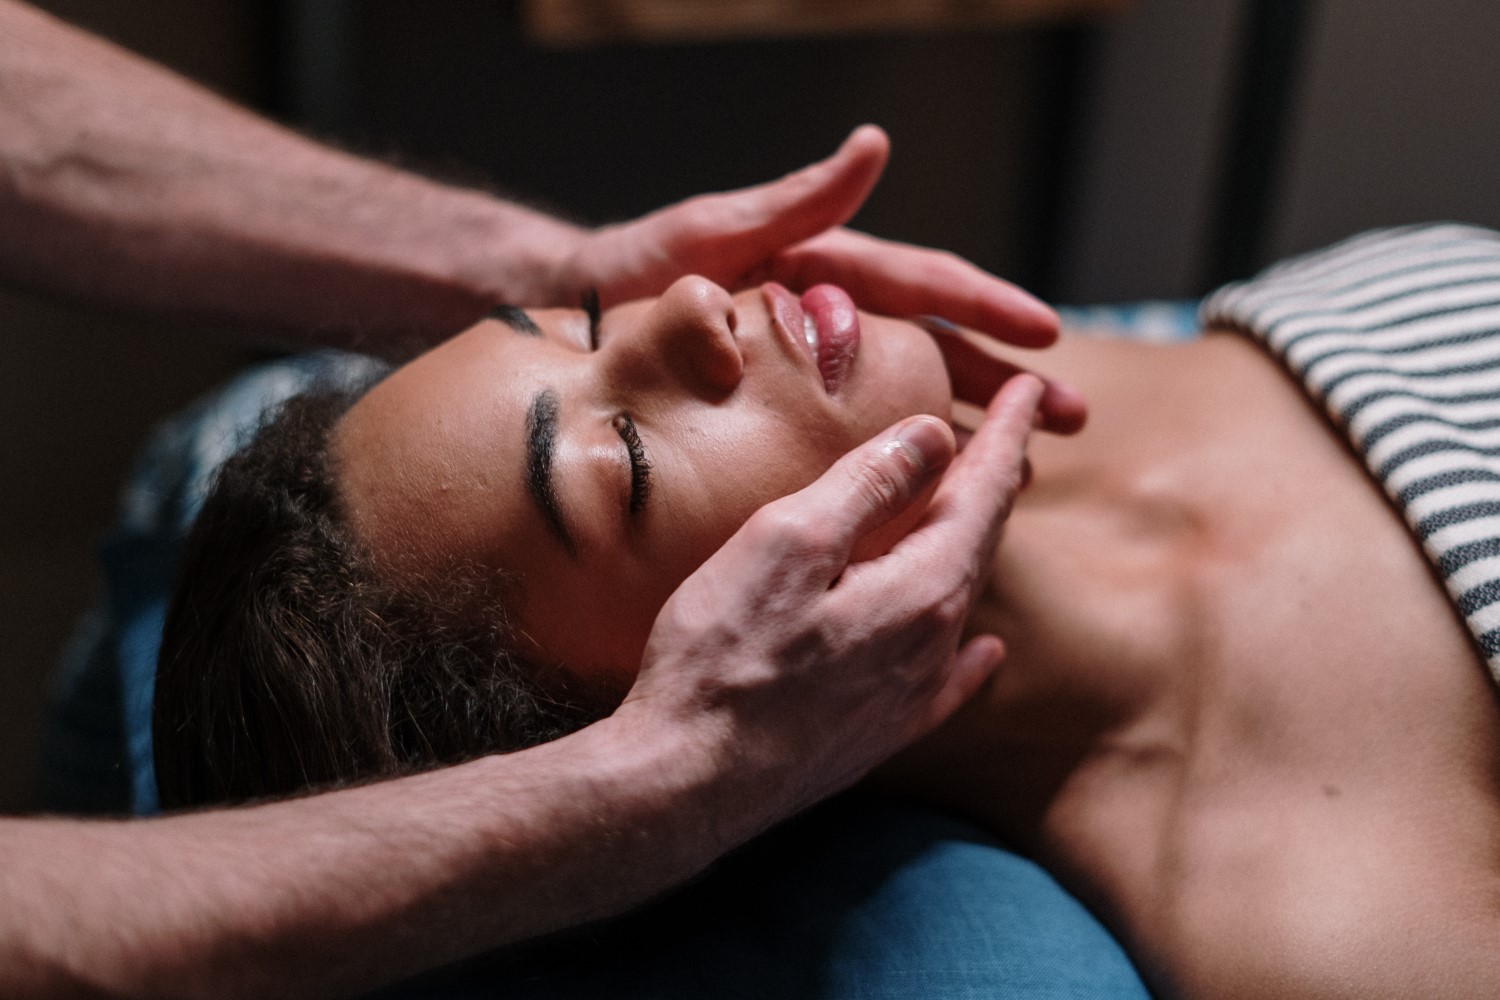 Close-up image of a woman getting a face massage